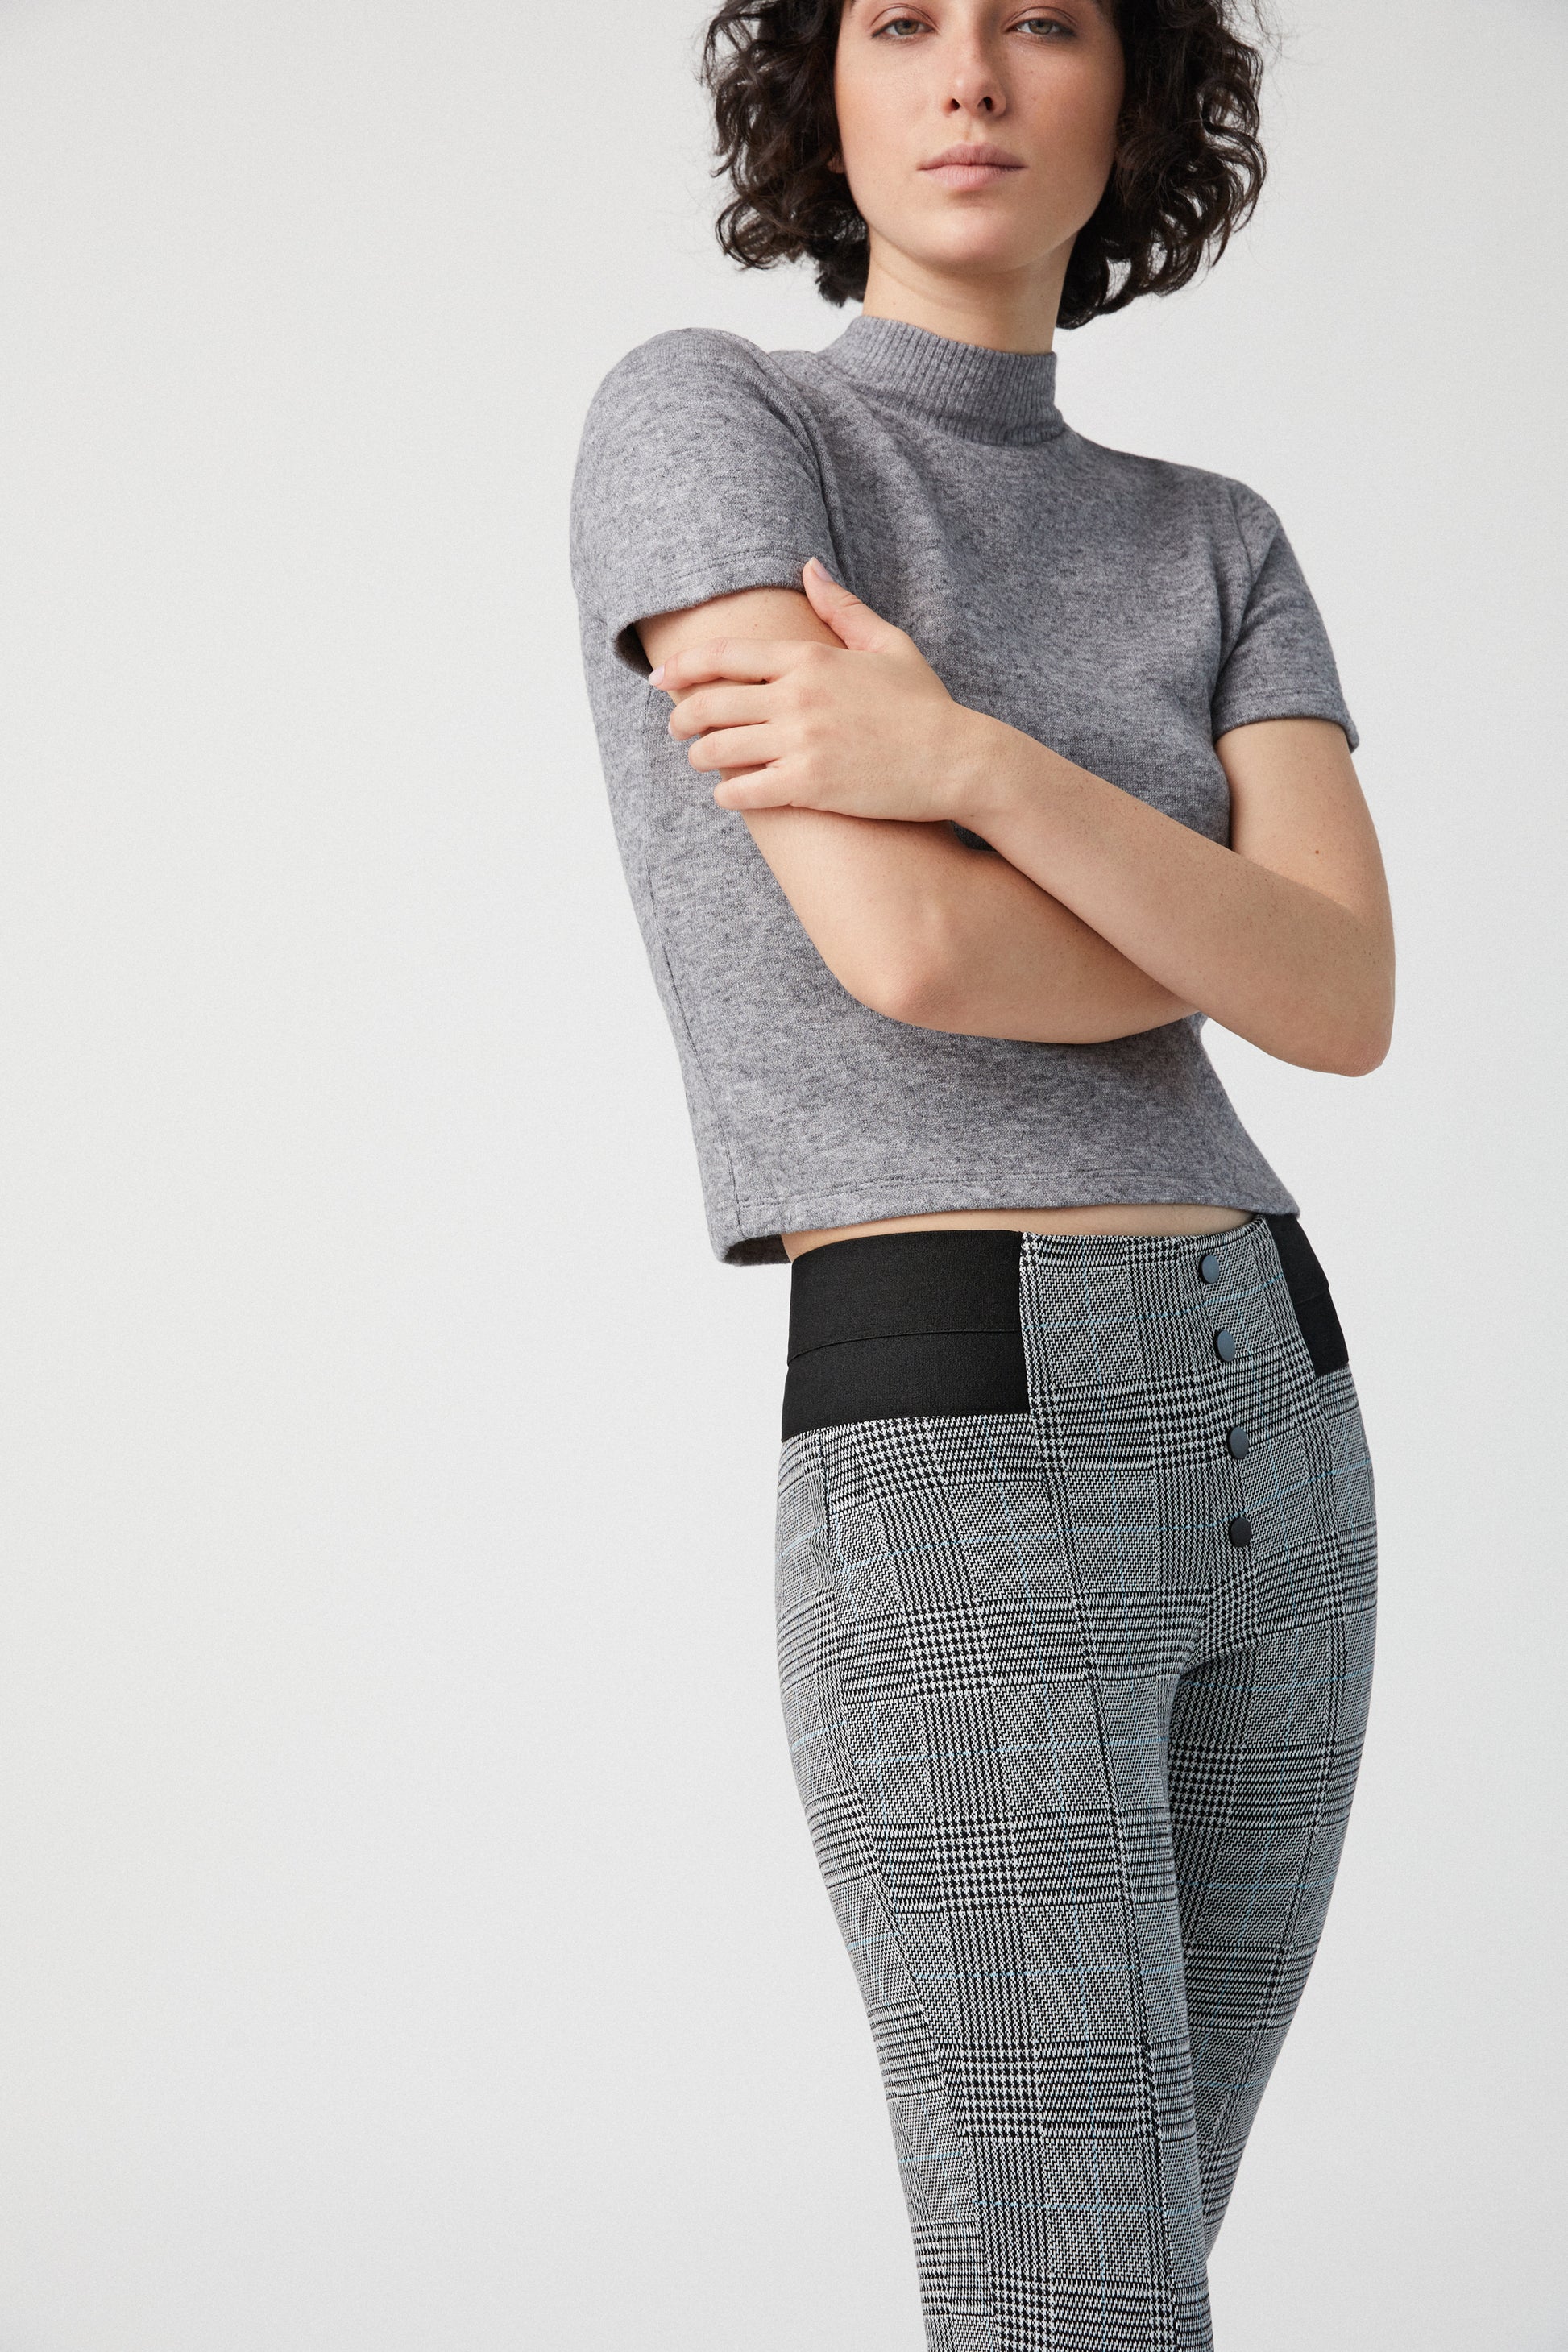 Ysabel Mora 70278 Leggings - High waisted black and white (grey) Prince of Wales tartan trouser leggings (treggings) with a thin stripe of light blue, black faux button closures and deep elasticated slimming waist band.